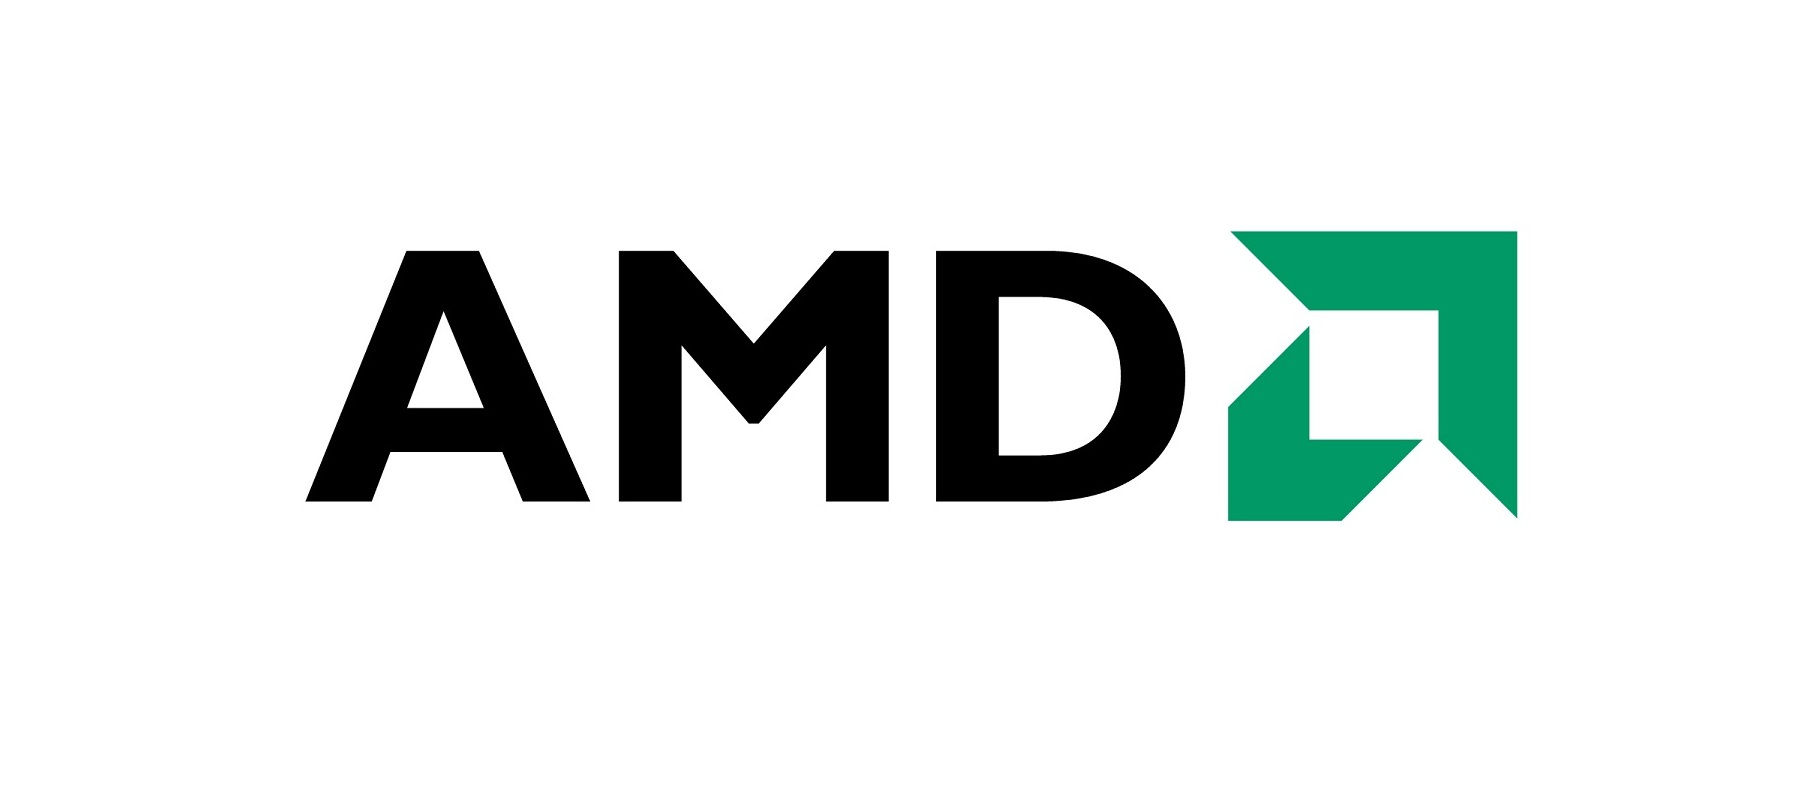 Former AMD Chip Architect Moved to Samsung